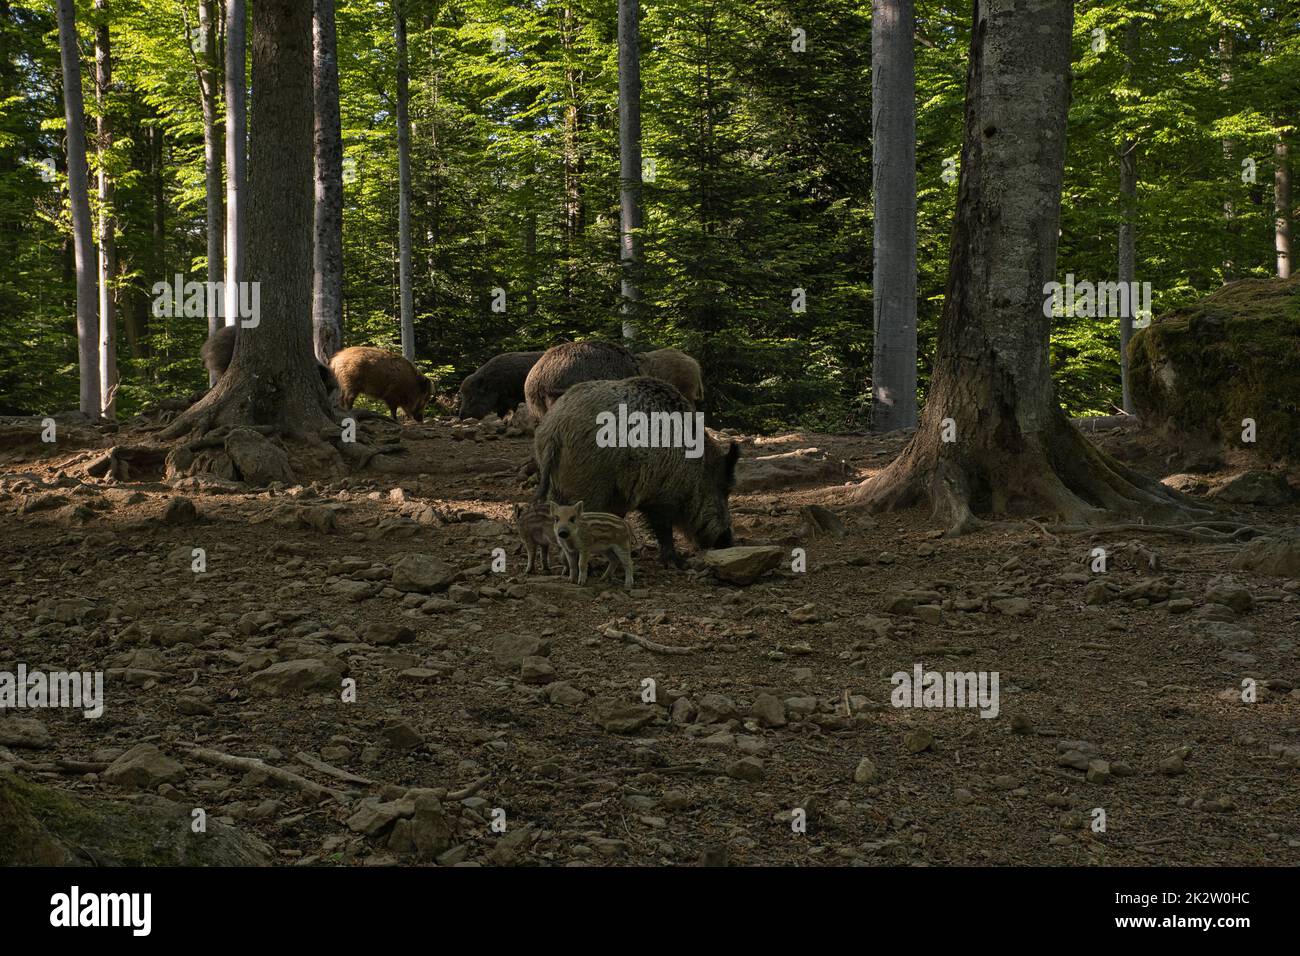 Wild boars in forest with two young wild boars Stock Photo